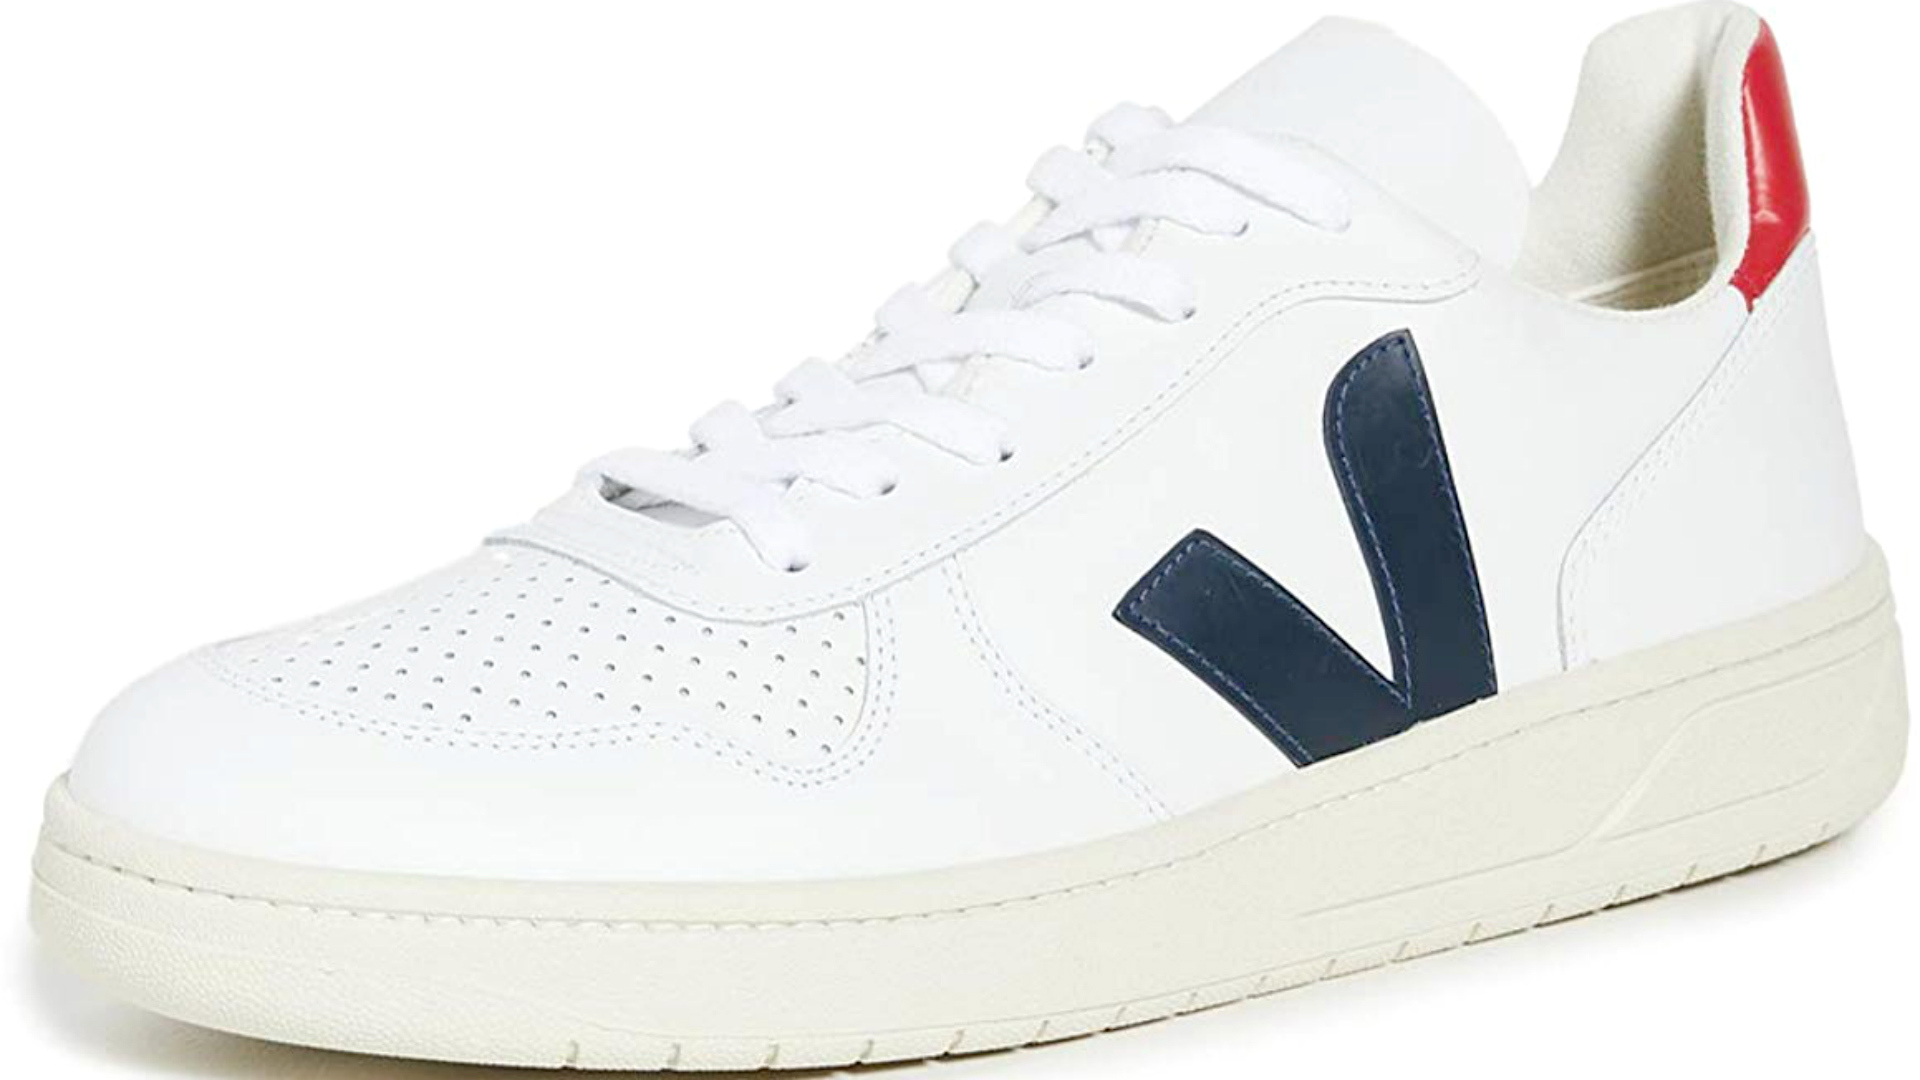 Classic sneakers that will always be trendy